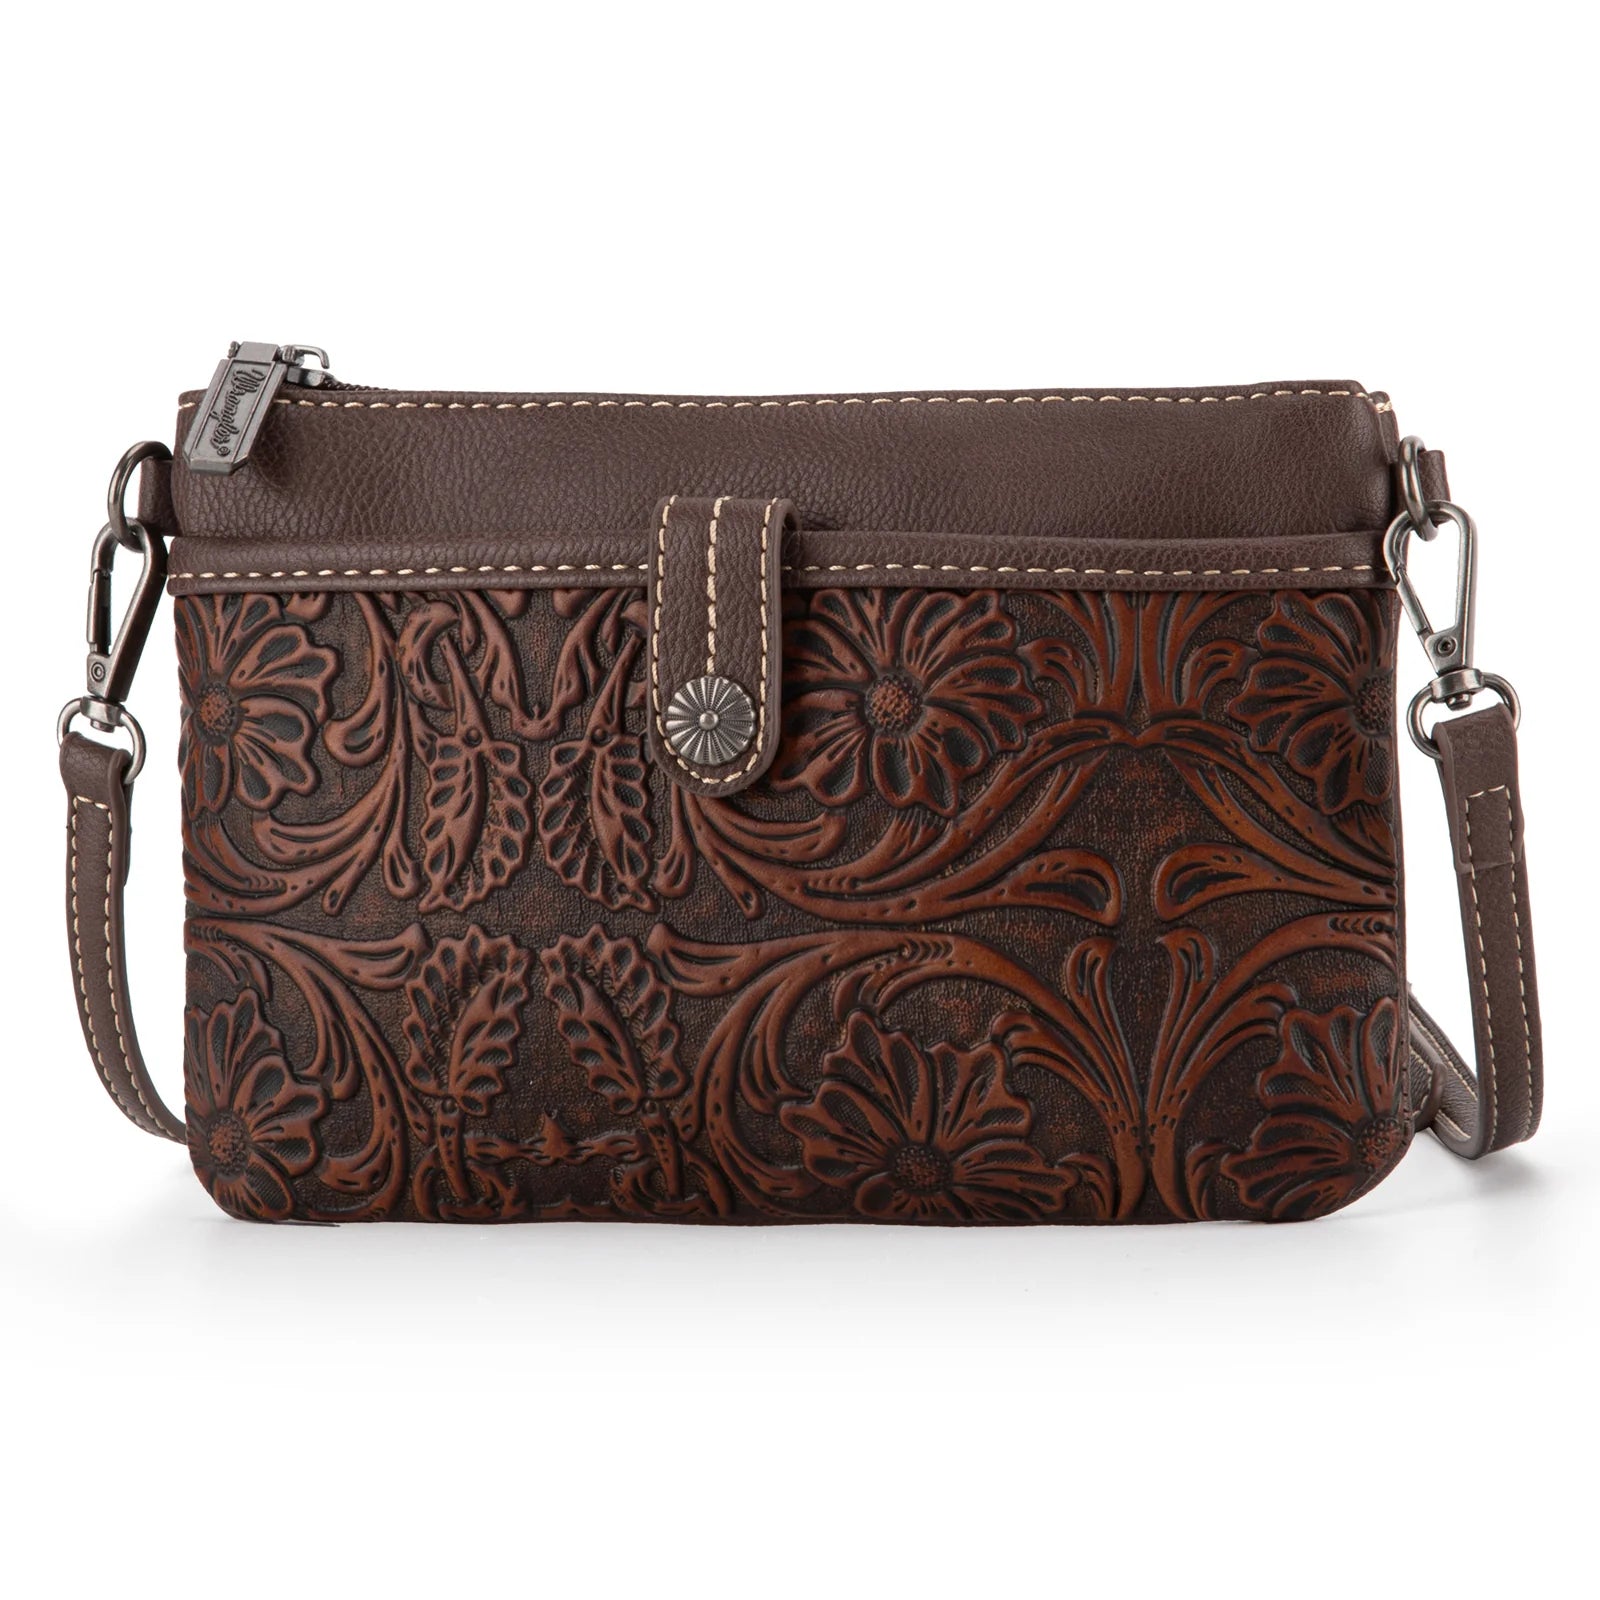 Wrangler Vintage Floral Tooled Collection Crossbody